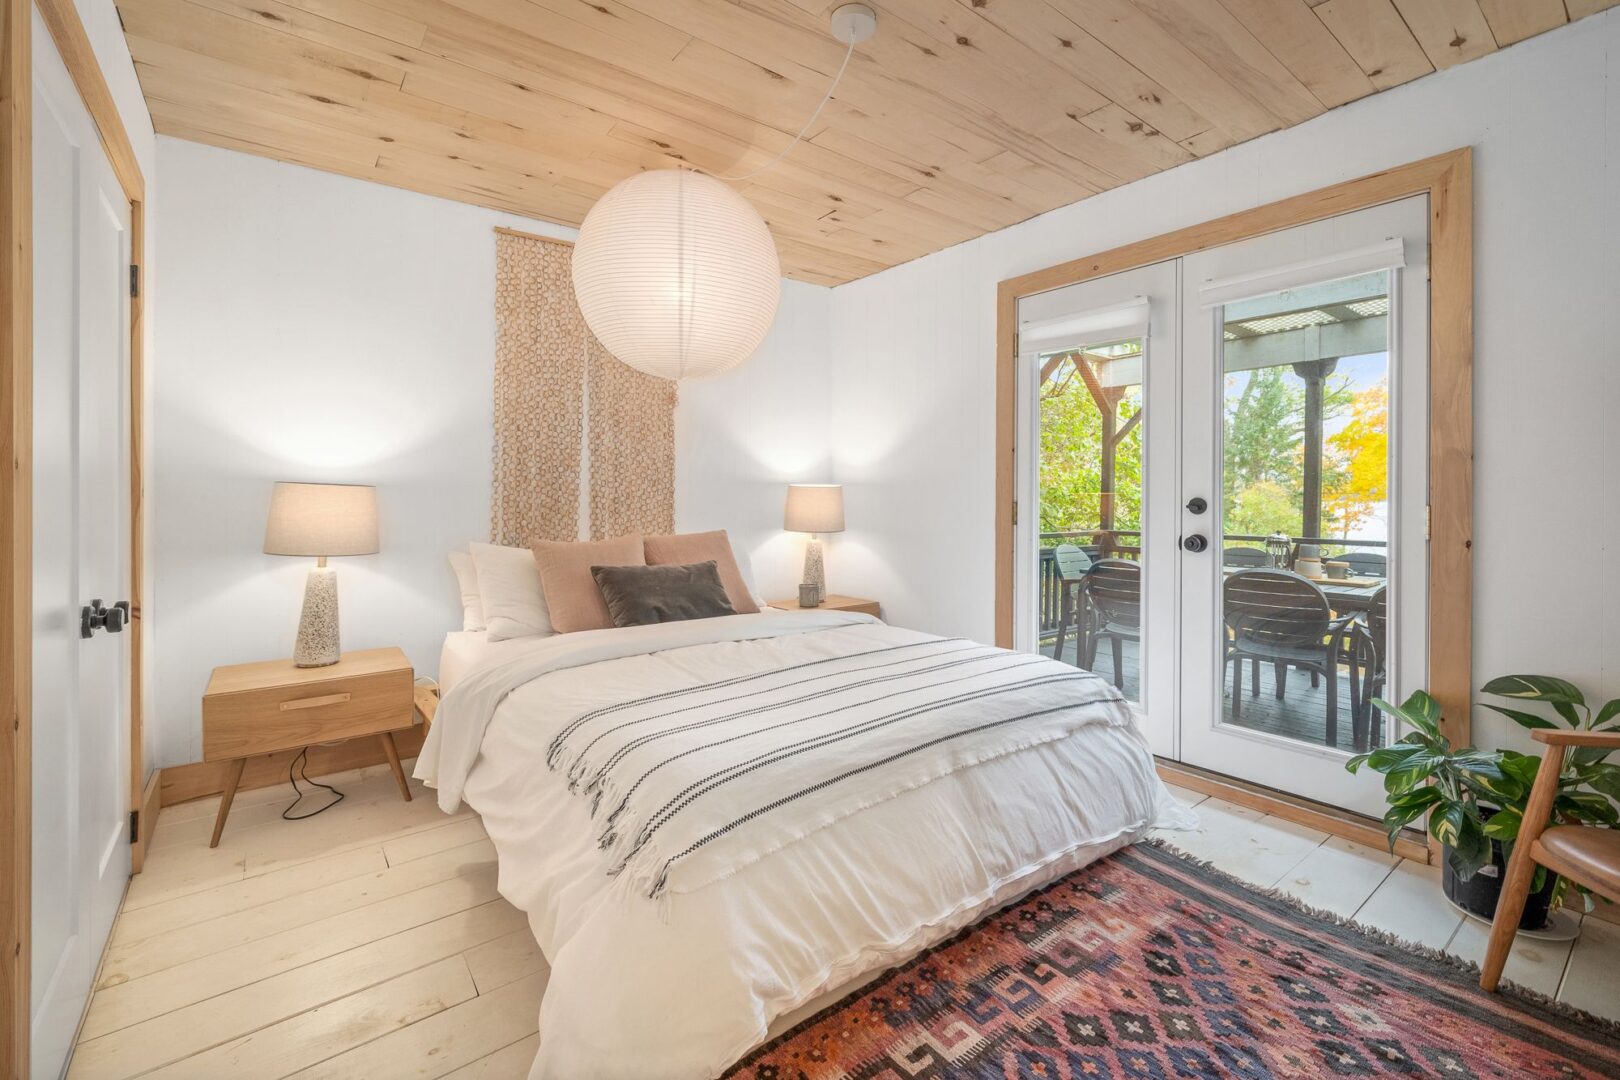 A big, bright bedroom with a large bed, a wood-panelled ceiling, and double glass doors leading to a deck.